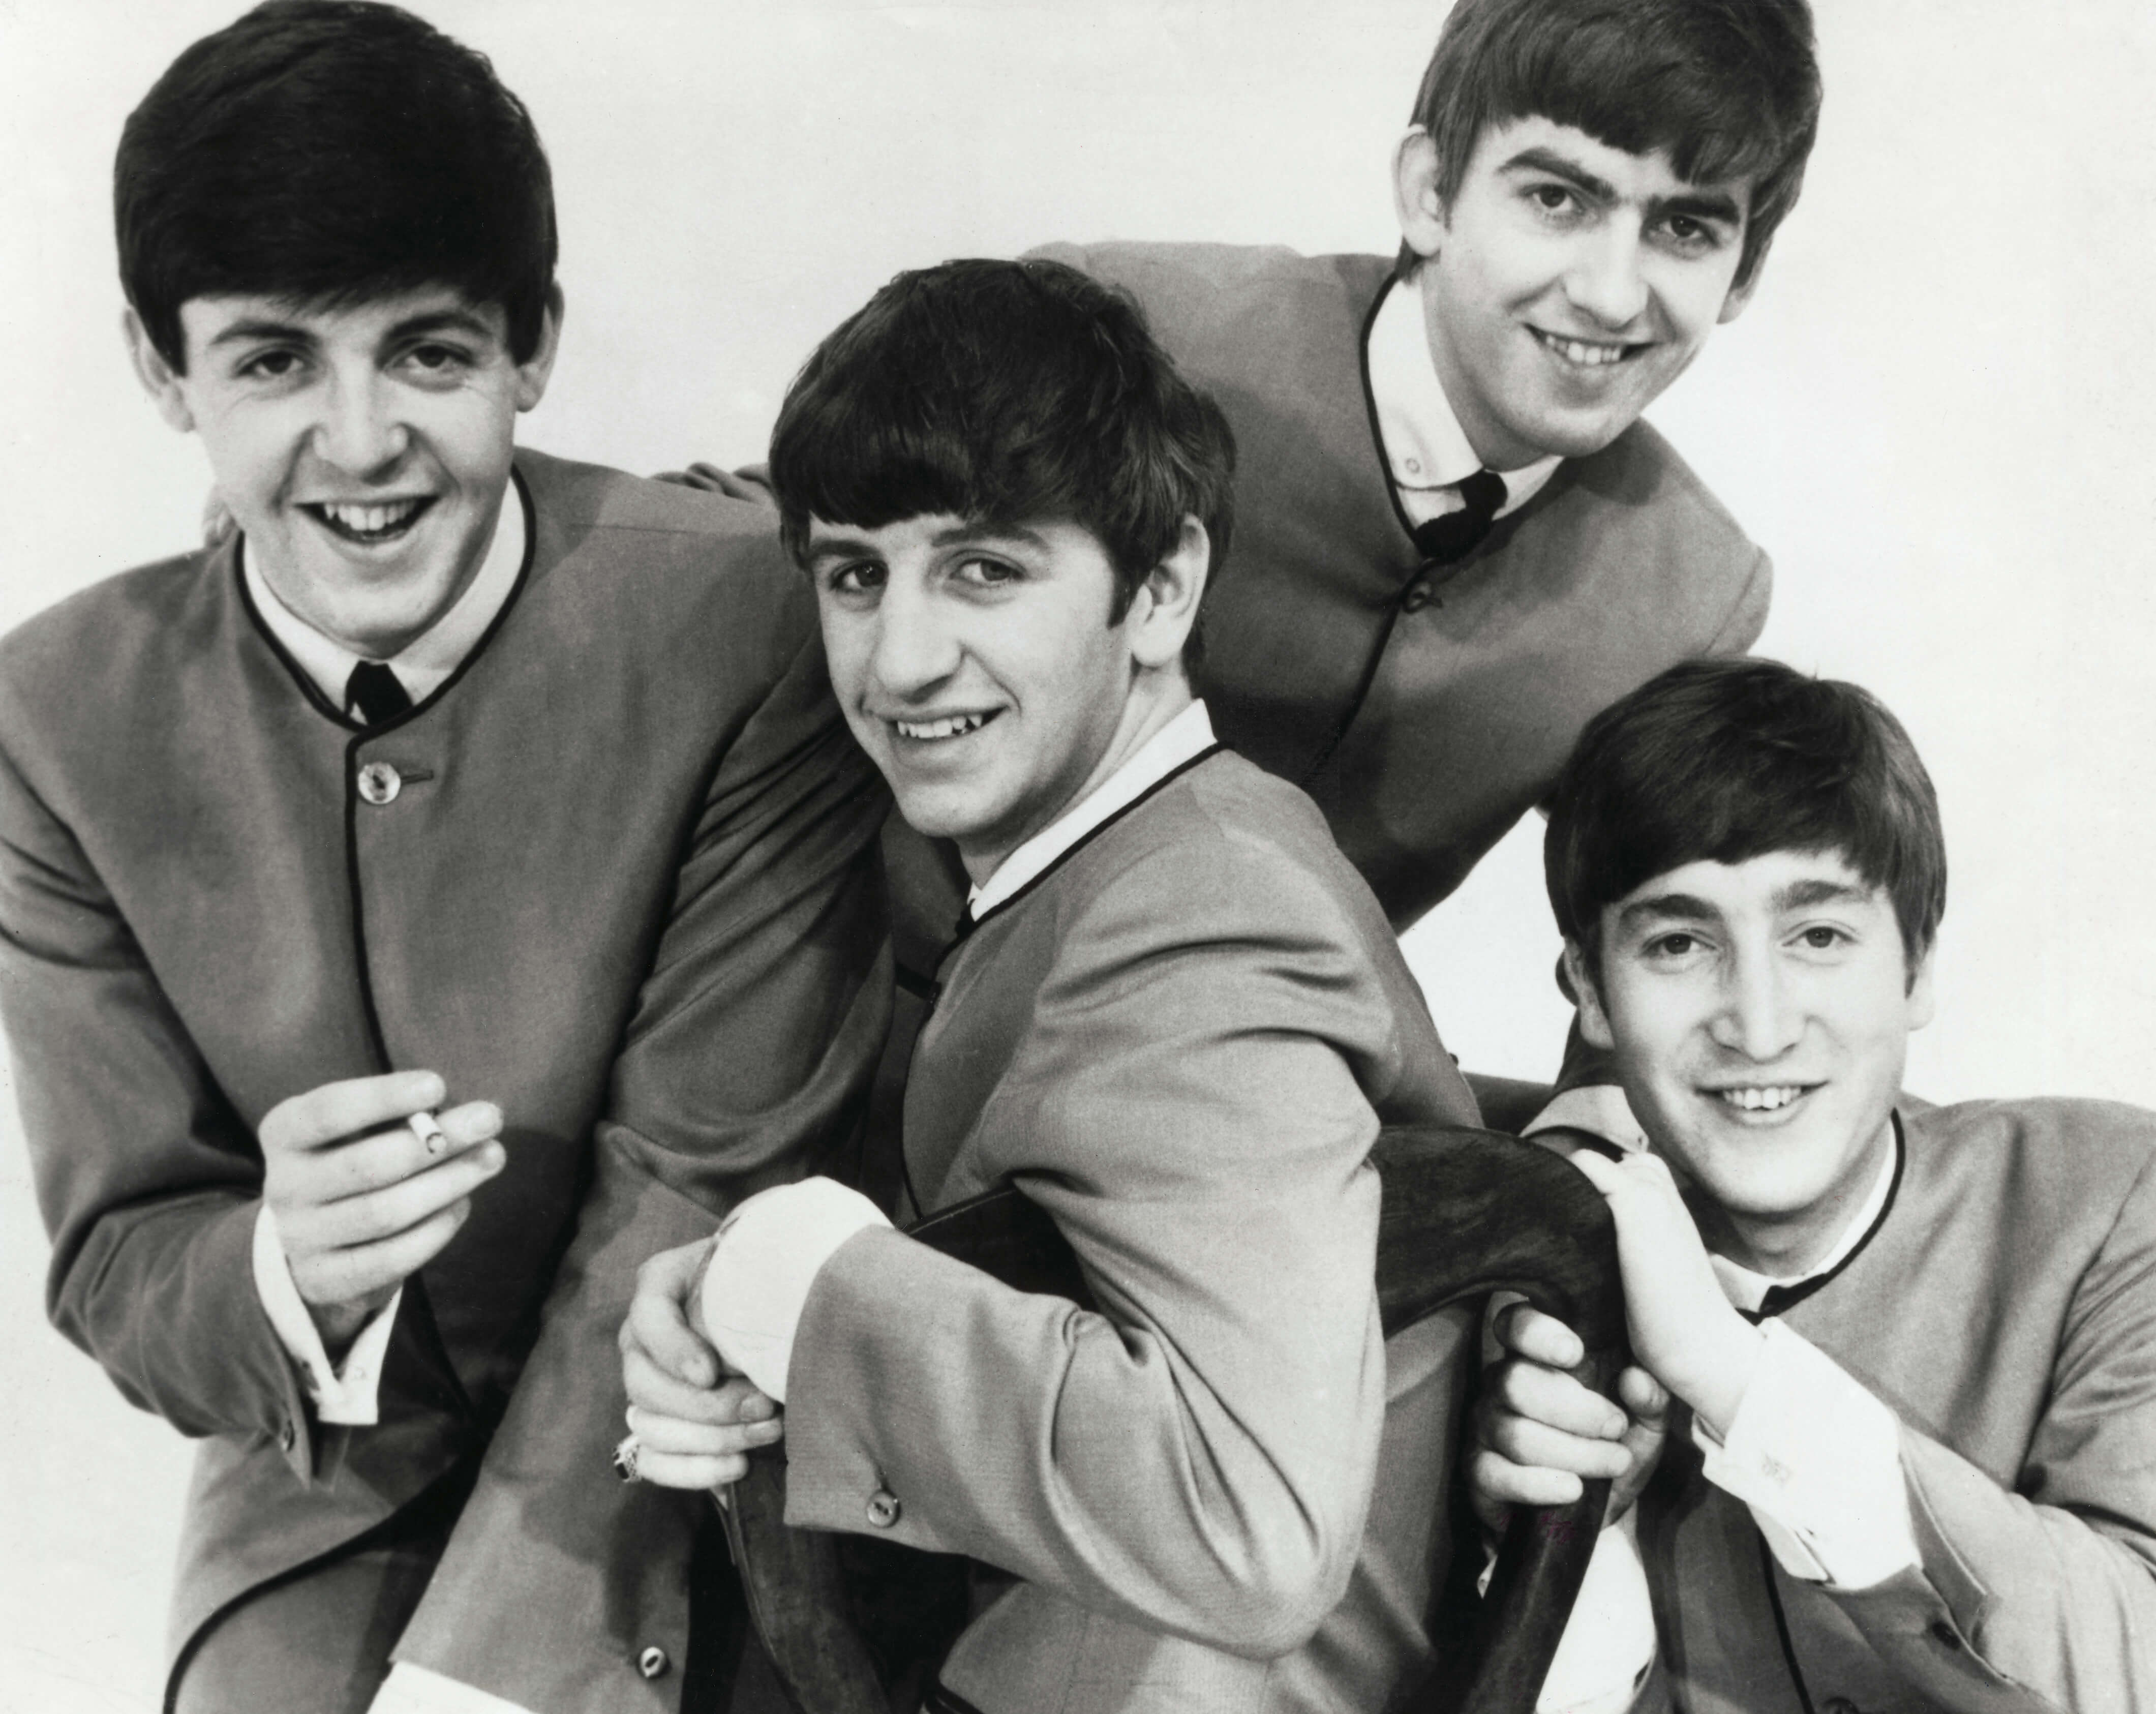 The Beatles in black-and-white